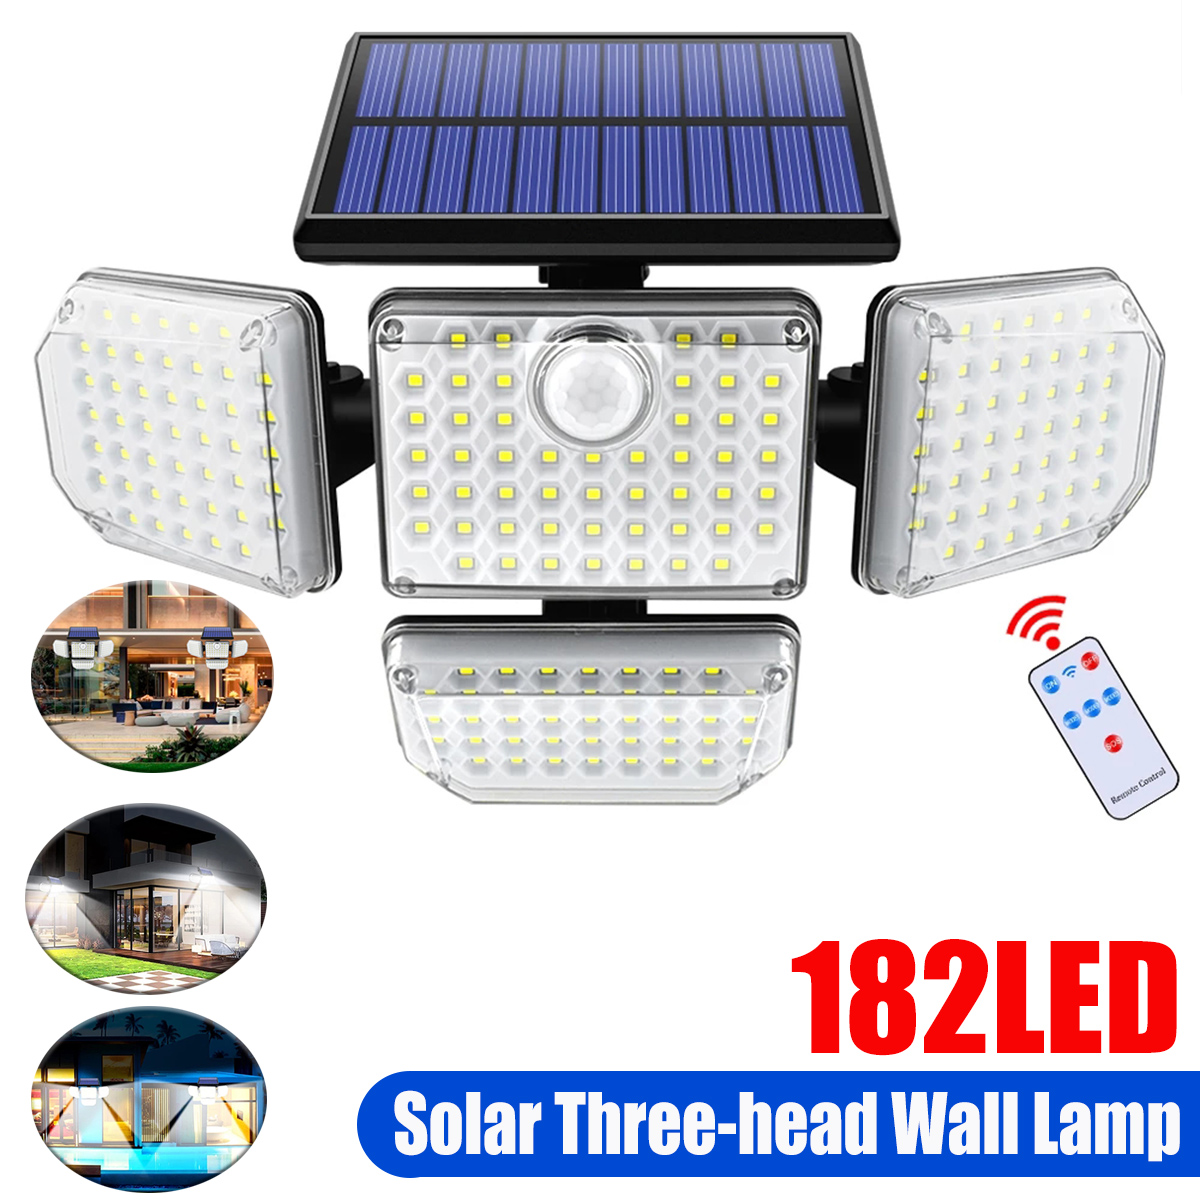 182LED-Solar-Wall-Lamp-Three-head-Induction-Street-Light-Pathway-Lighting-With-Remote-Control-1881796-1